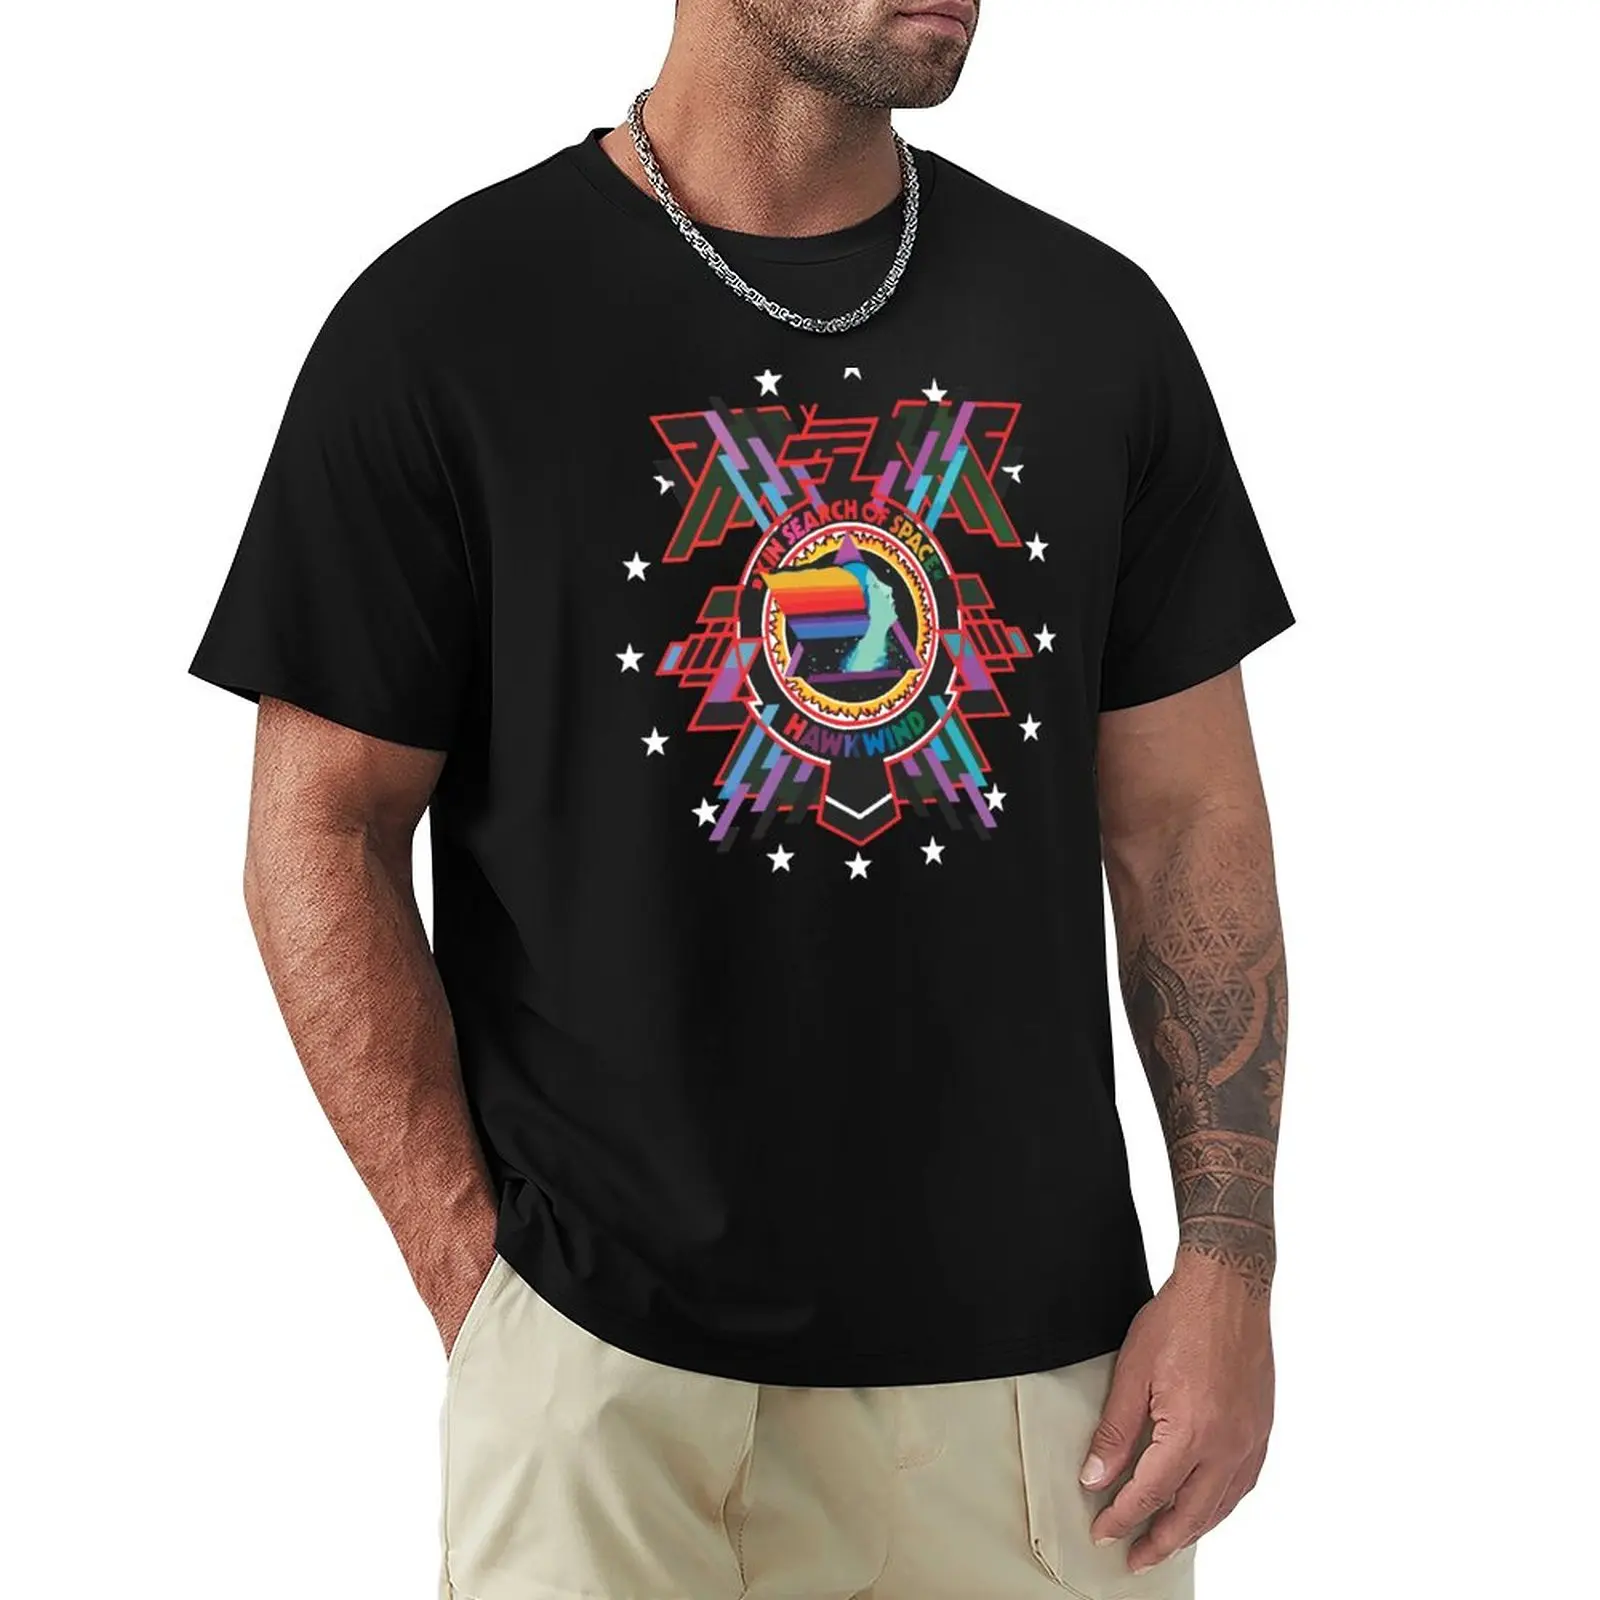 Hawkwind – In Search Of Space T-Shirt Funny T Shirt Cat Shirts Hippie Clothes Custom T Shirt Mens T Shirt